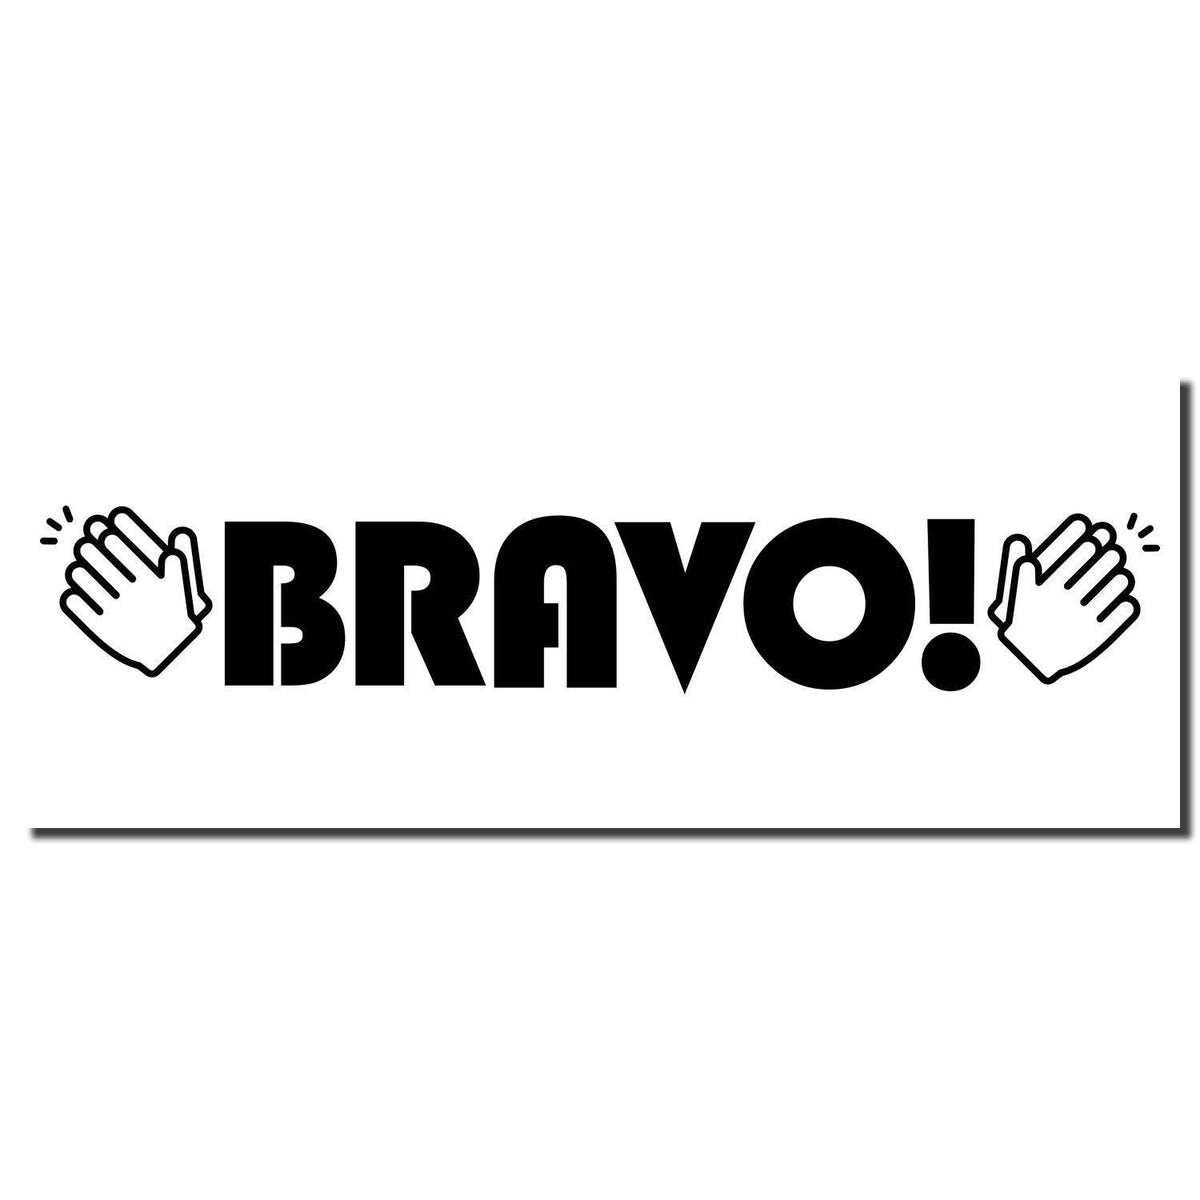 Enlarged Imprint Bravo with Hands Rubber Stamp Sample